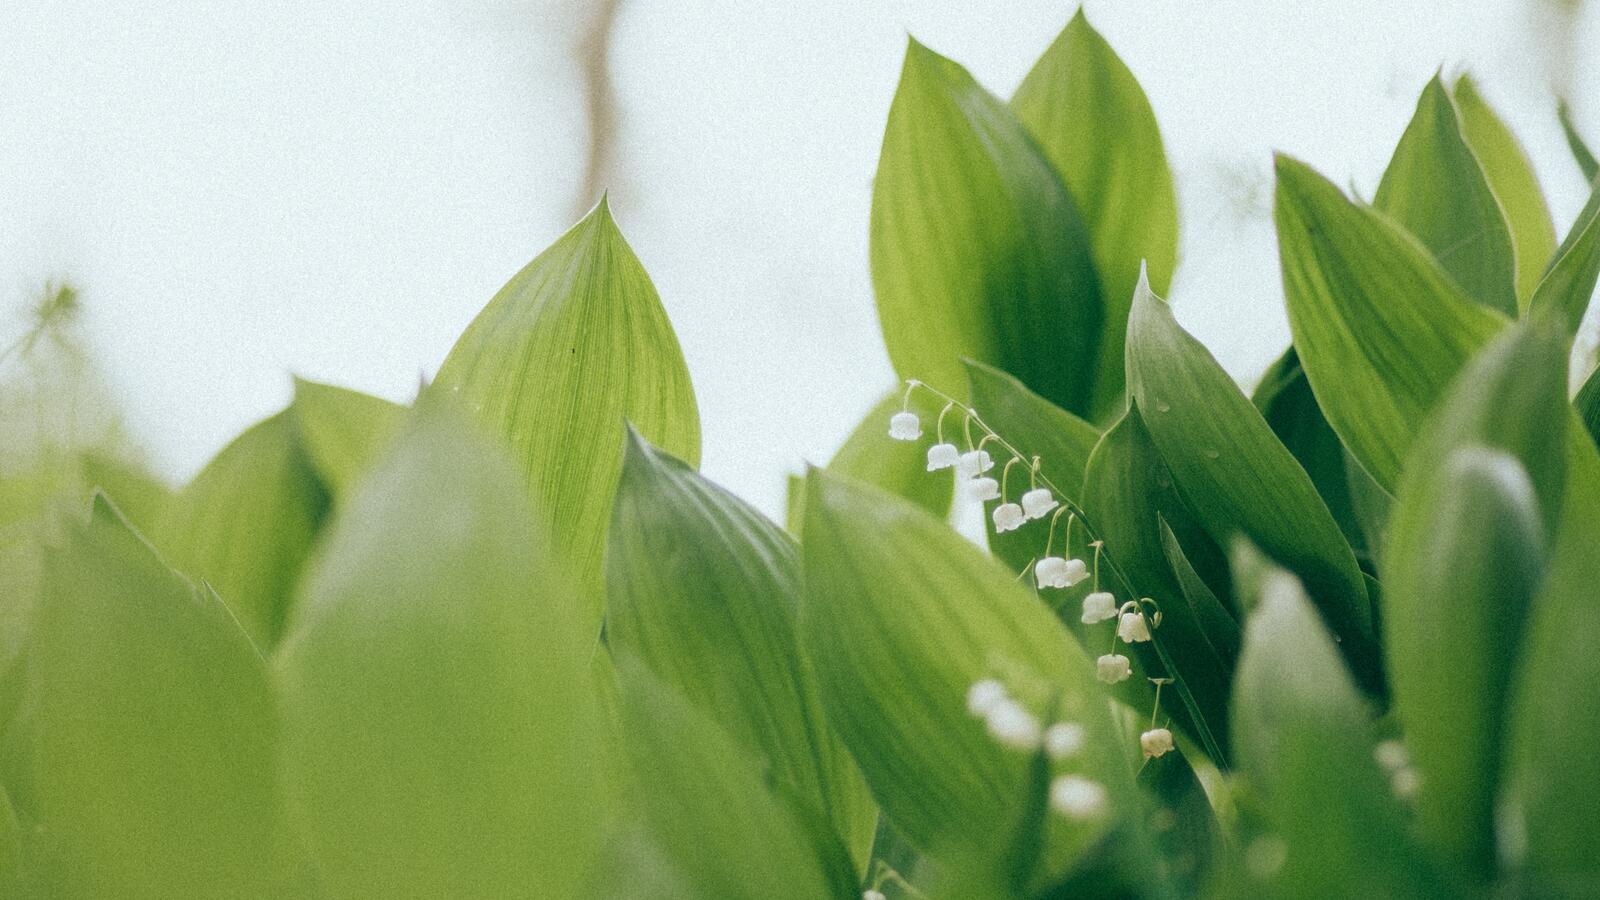 Wallpapers lily of the valley flowers leaves on the desktop